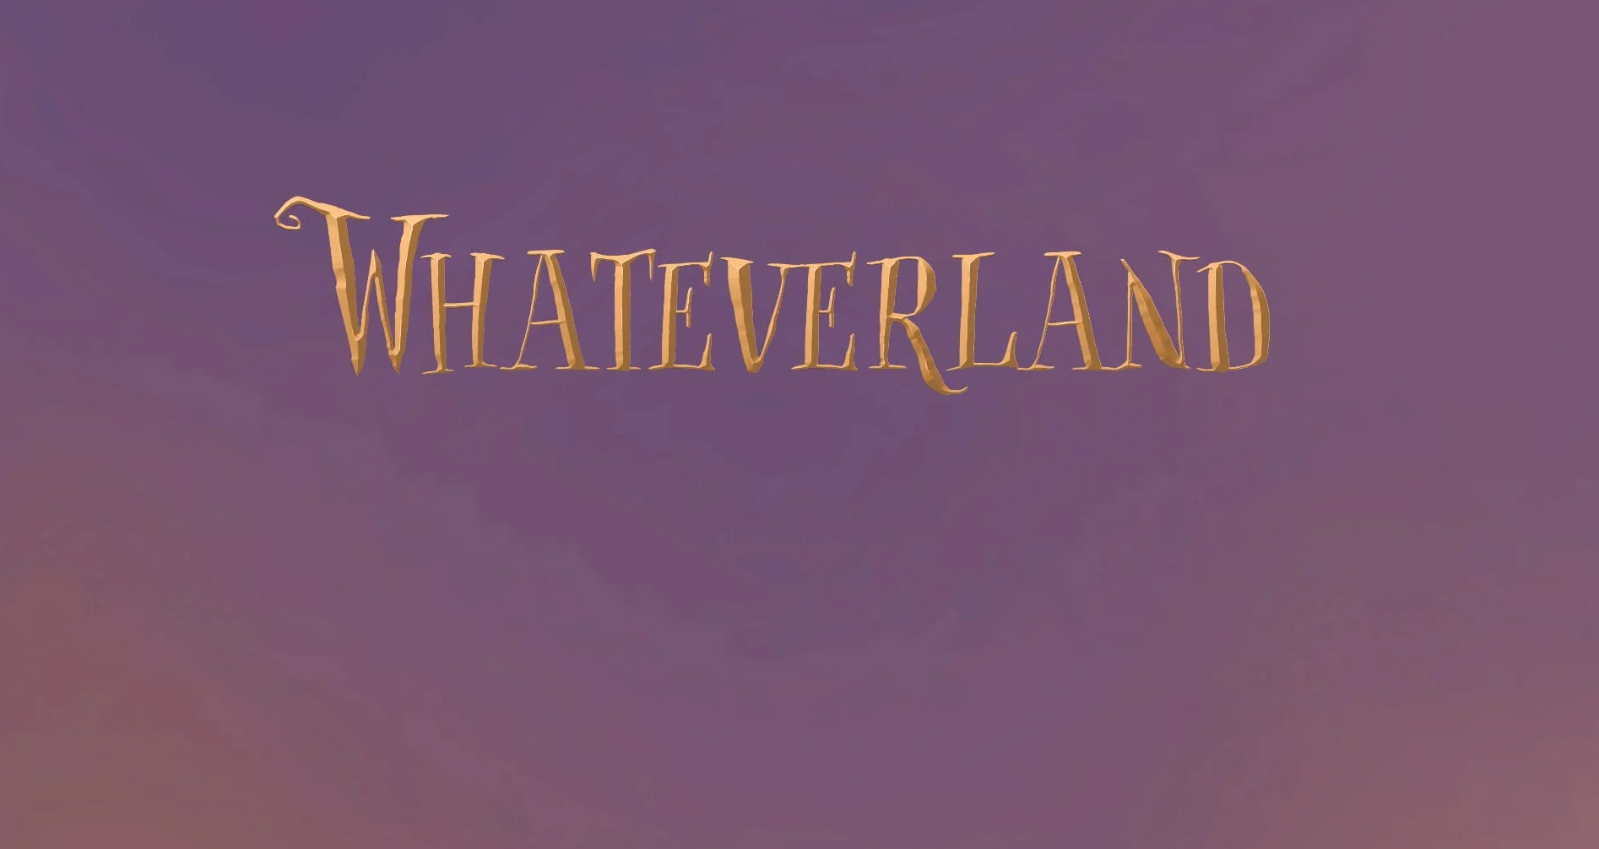 Whateverland Free Download